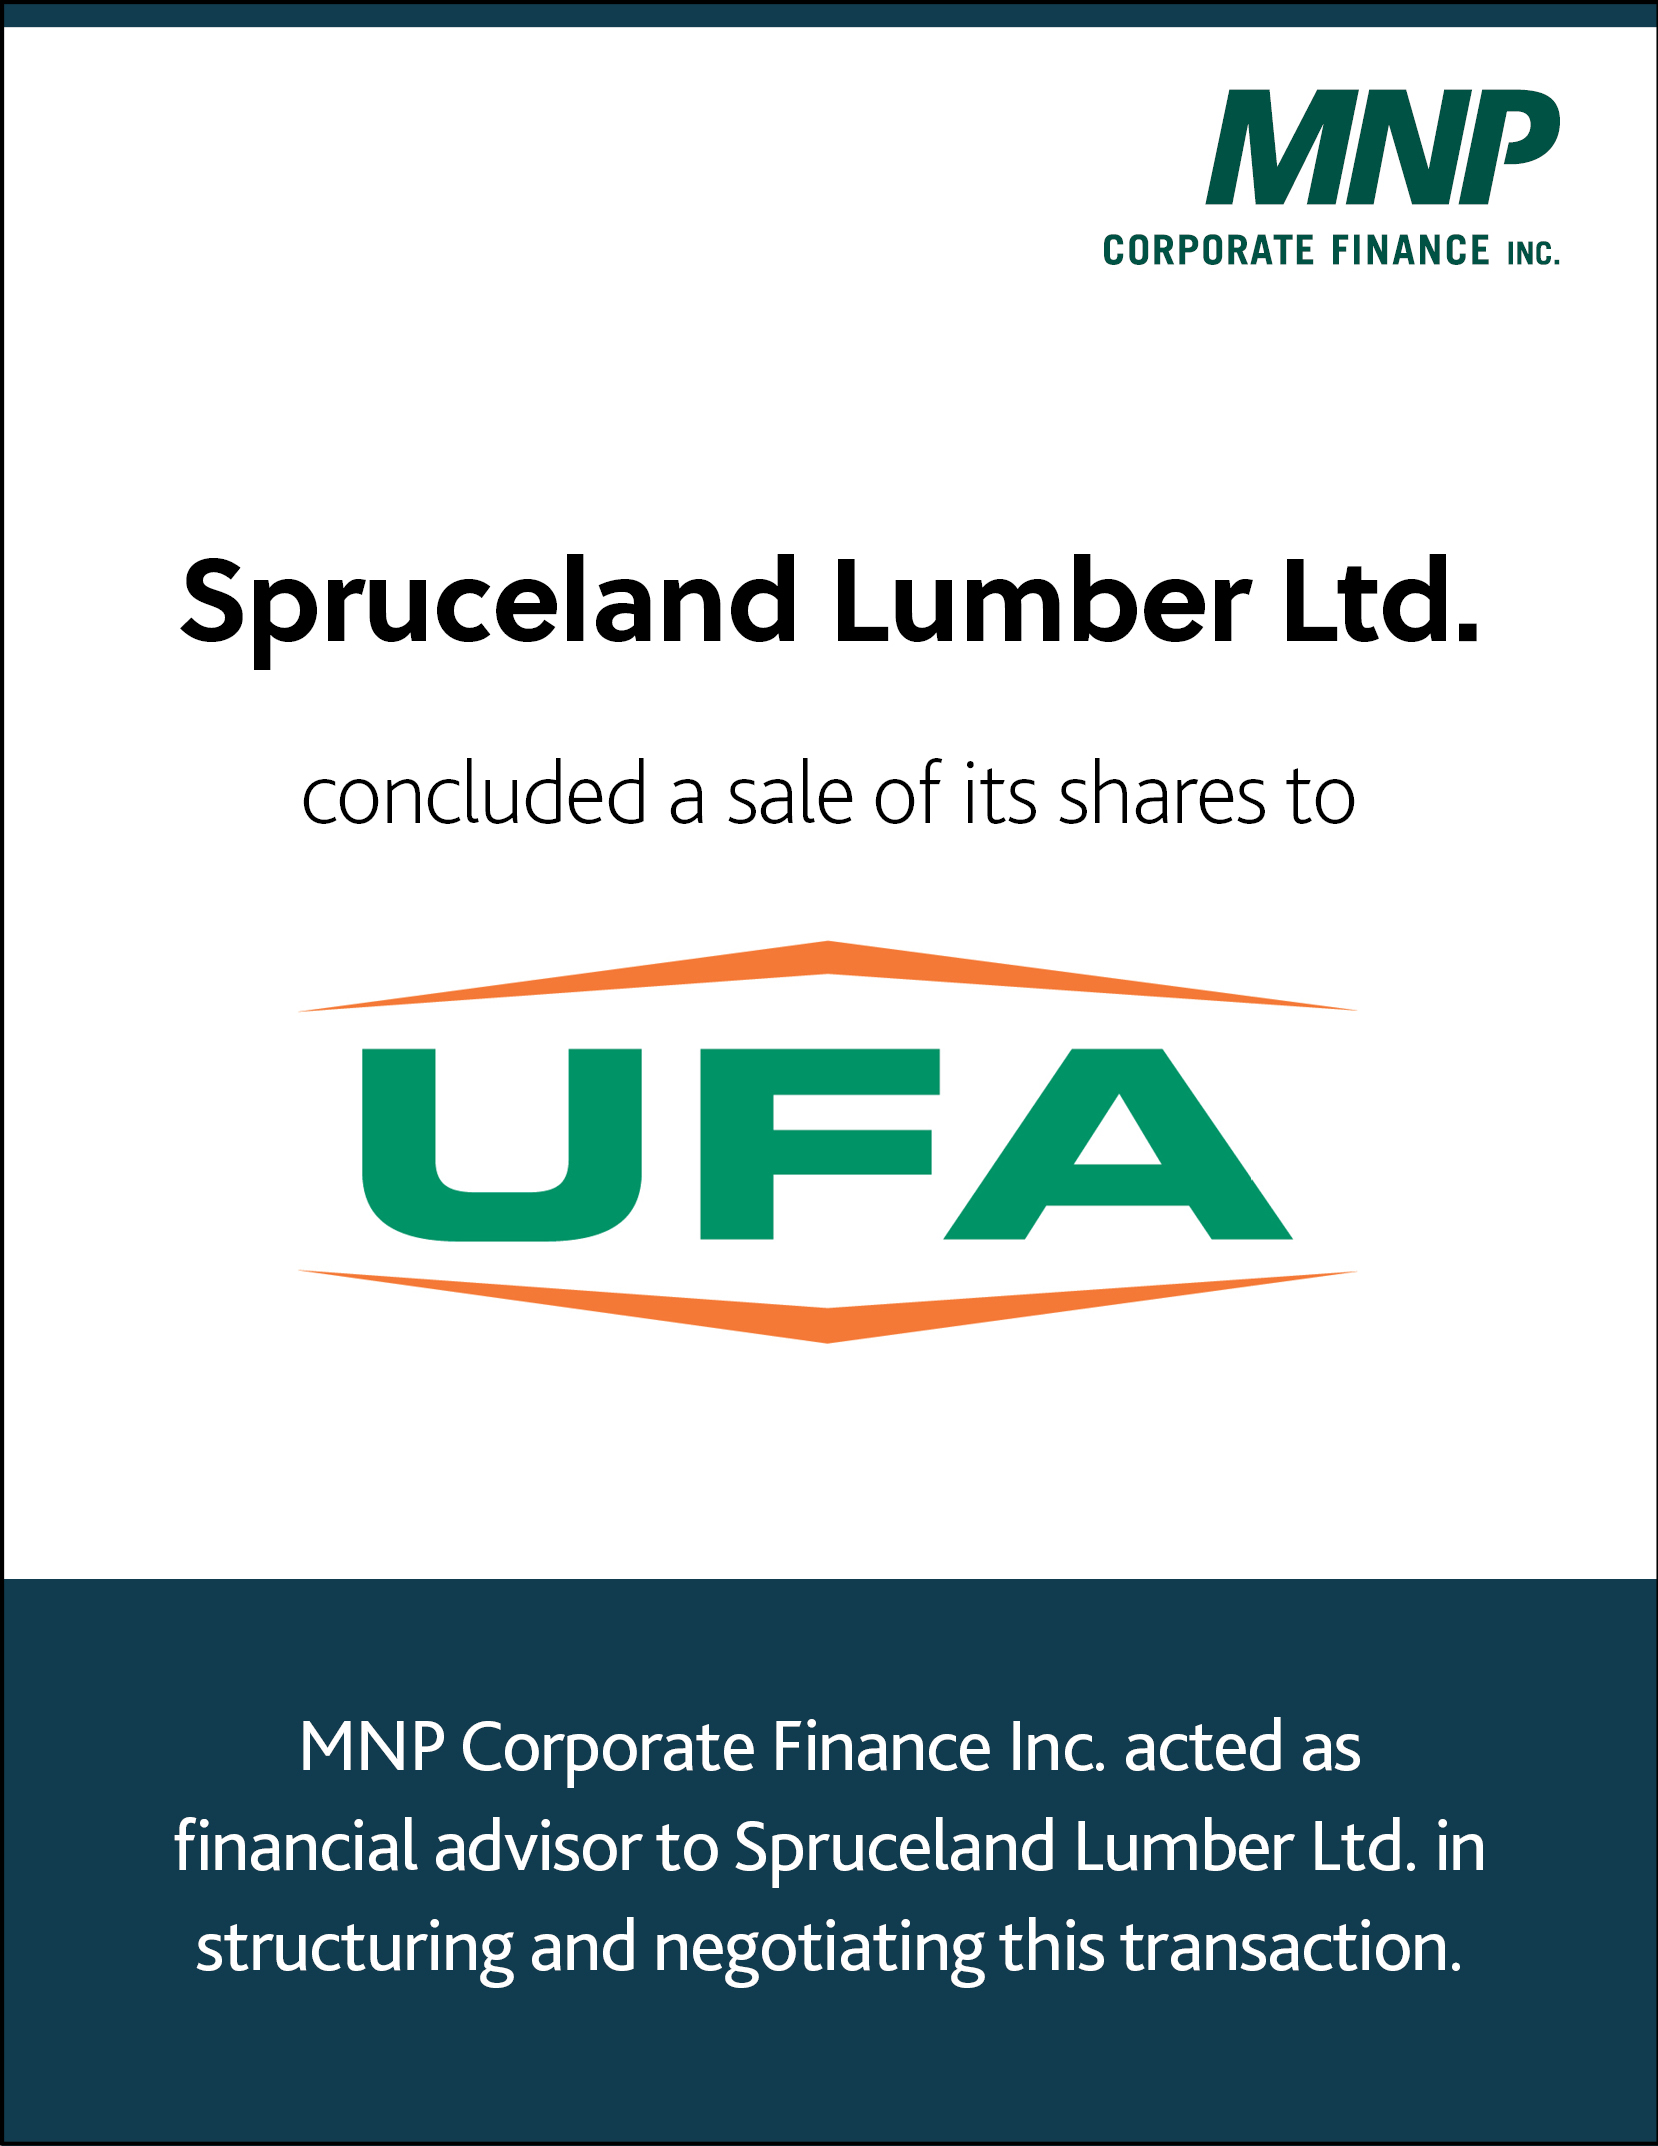 Spruceland Lumber Ltd concluded a sale of its shares to UFA 